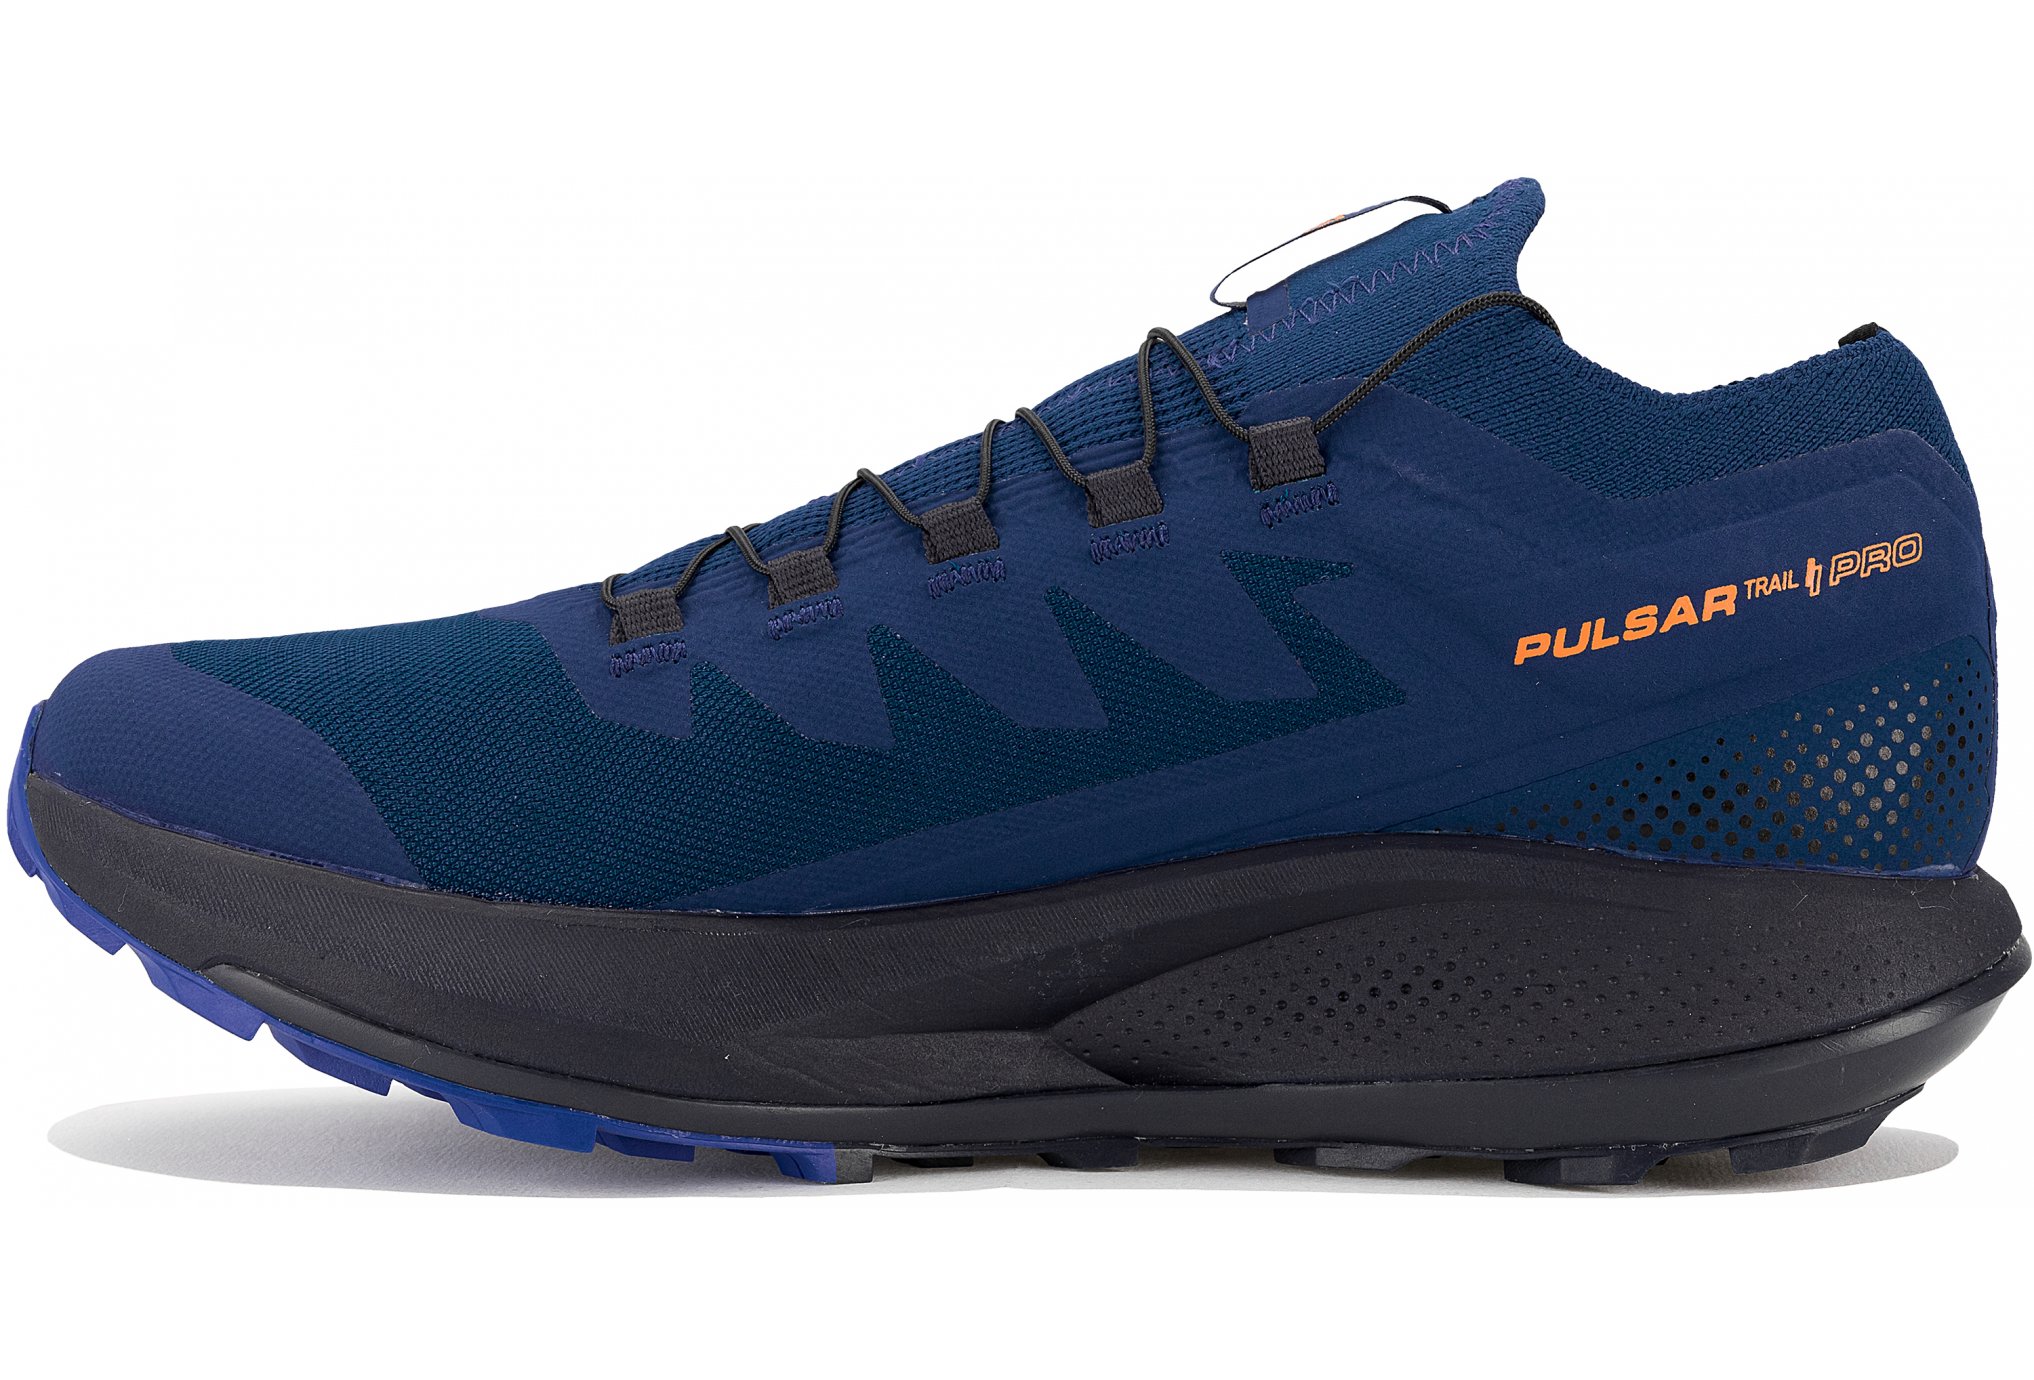 Top Salomon Pulsar Trail Pro of all time Access here!